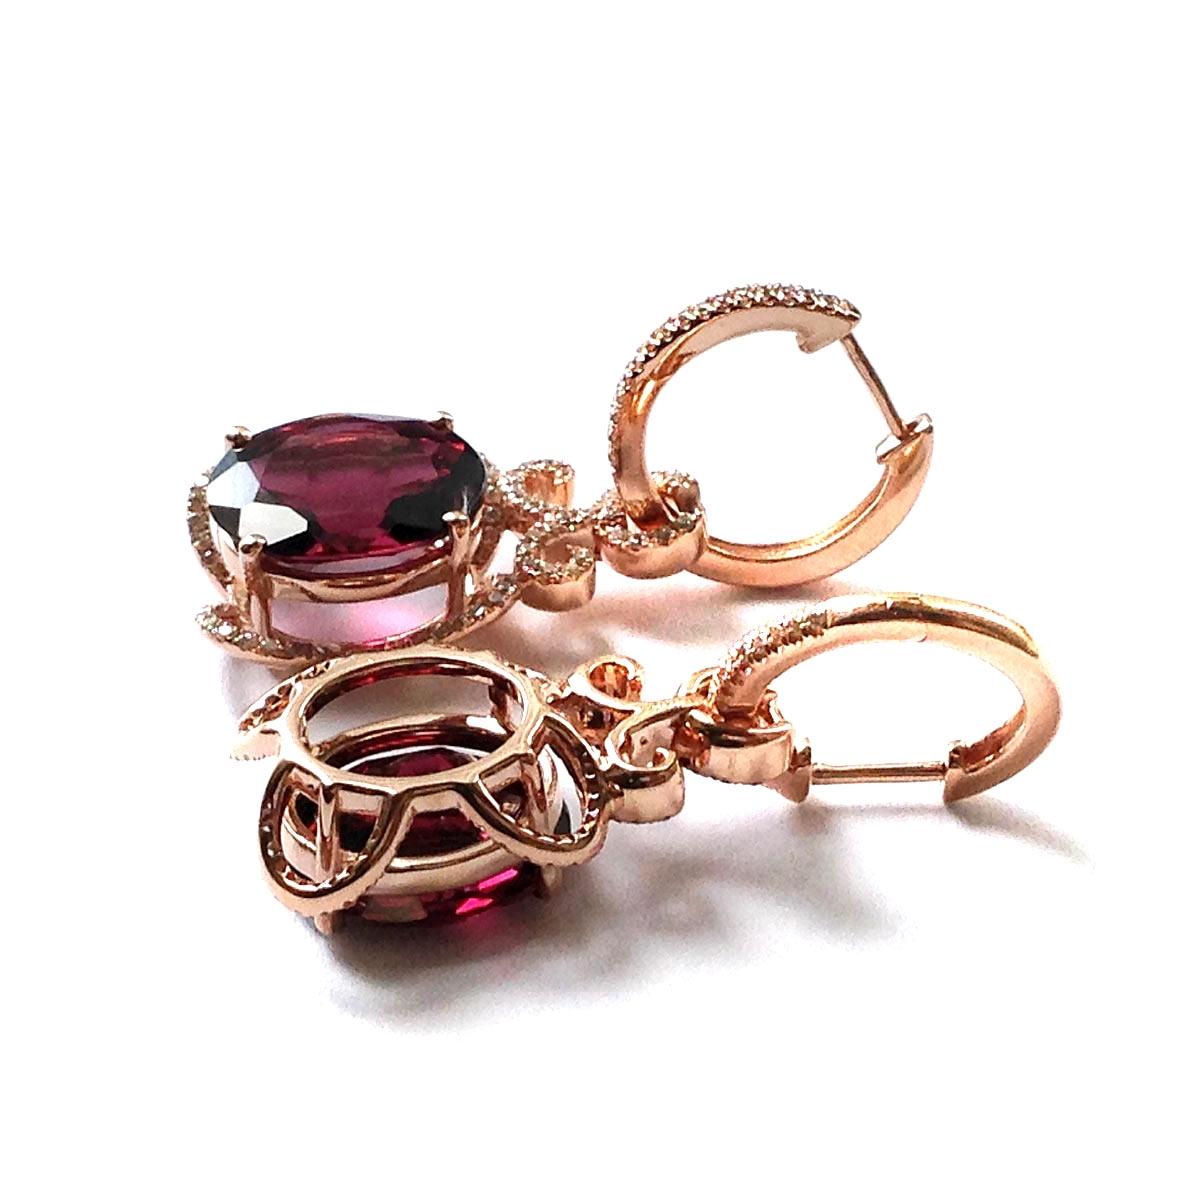 Introducing a stunning pair of Rhodolite Garnet earrings, harmoniously blending the hues of purple and red. Carefully selected for their exceptional quality, each garnet weighs 10.27 carats and is beautifully set in a 14K Rose Gold setting. The rose